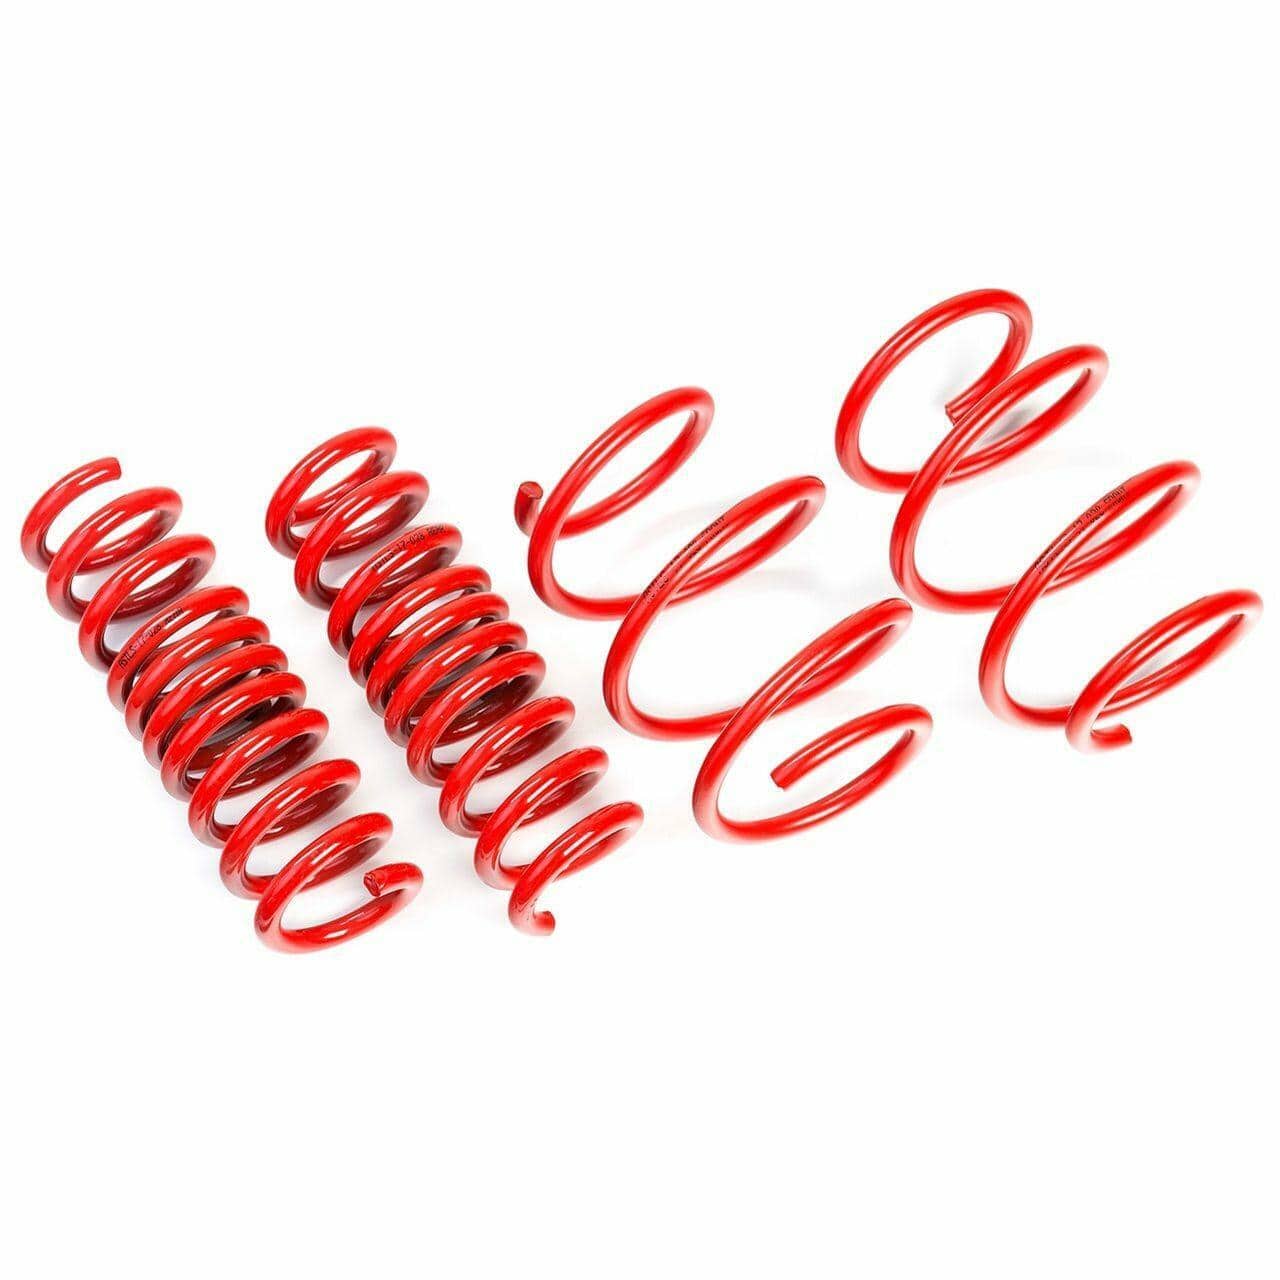 AST Suspension Lowering Springs (30MM/30MM) - 2006-2016 Volvo S80 3.2/D/T6 AWD (A) ASTLS-14-2665